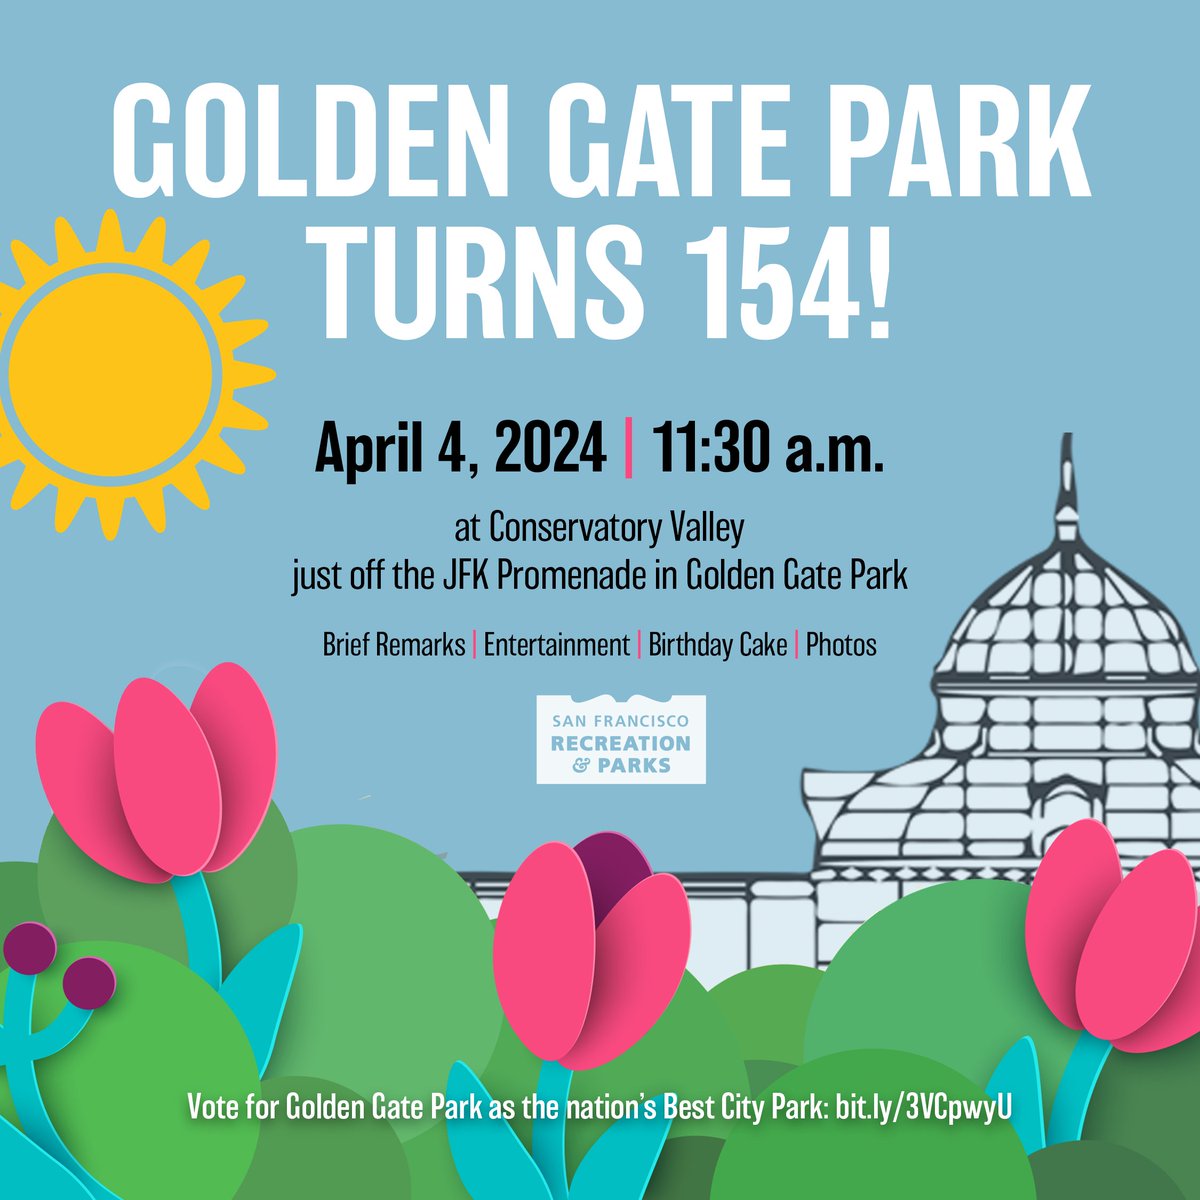 Join us to celebrate Golden Gate Park's 154th birthday on Thursday, 4/4 beginning at 11:30AM. It'll take place in Conservatory Valley between the @SFConservatory & JFK Promenade. There will be entertainment, activities, a group photo & the cutting of the park's birthday cake!